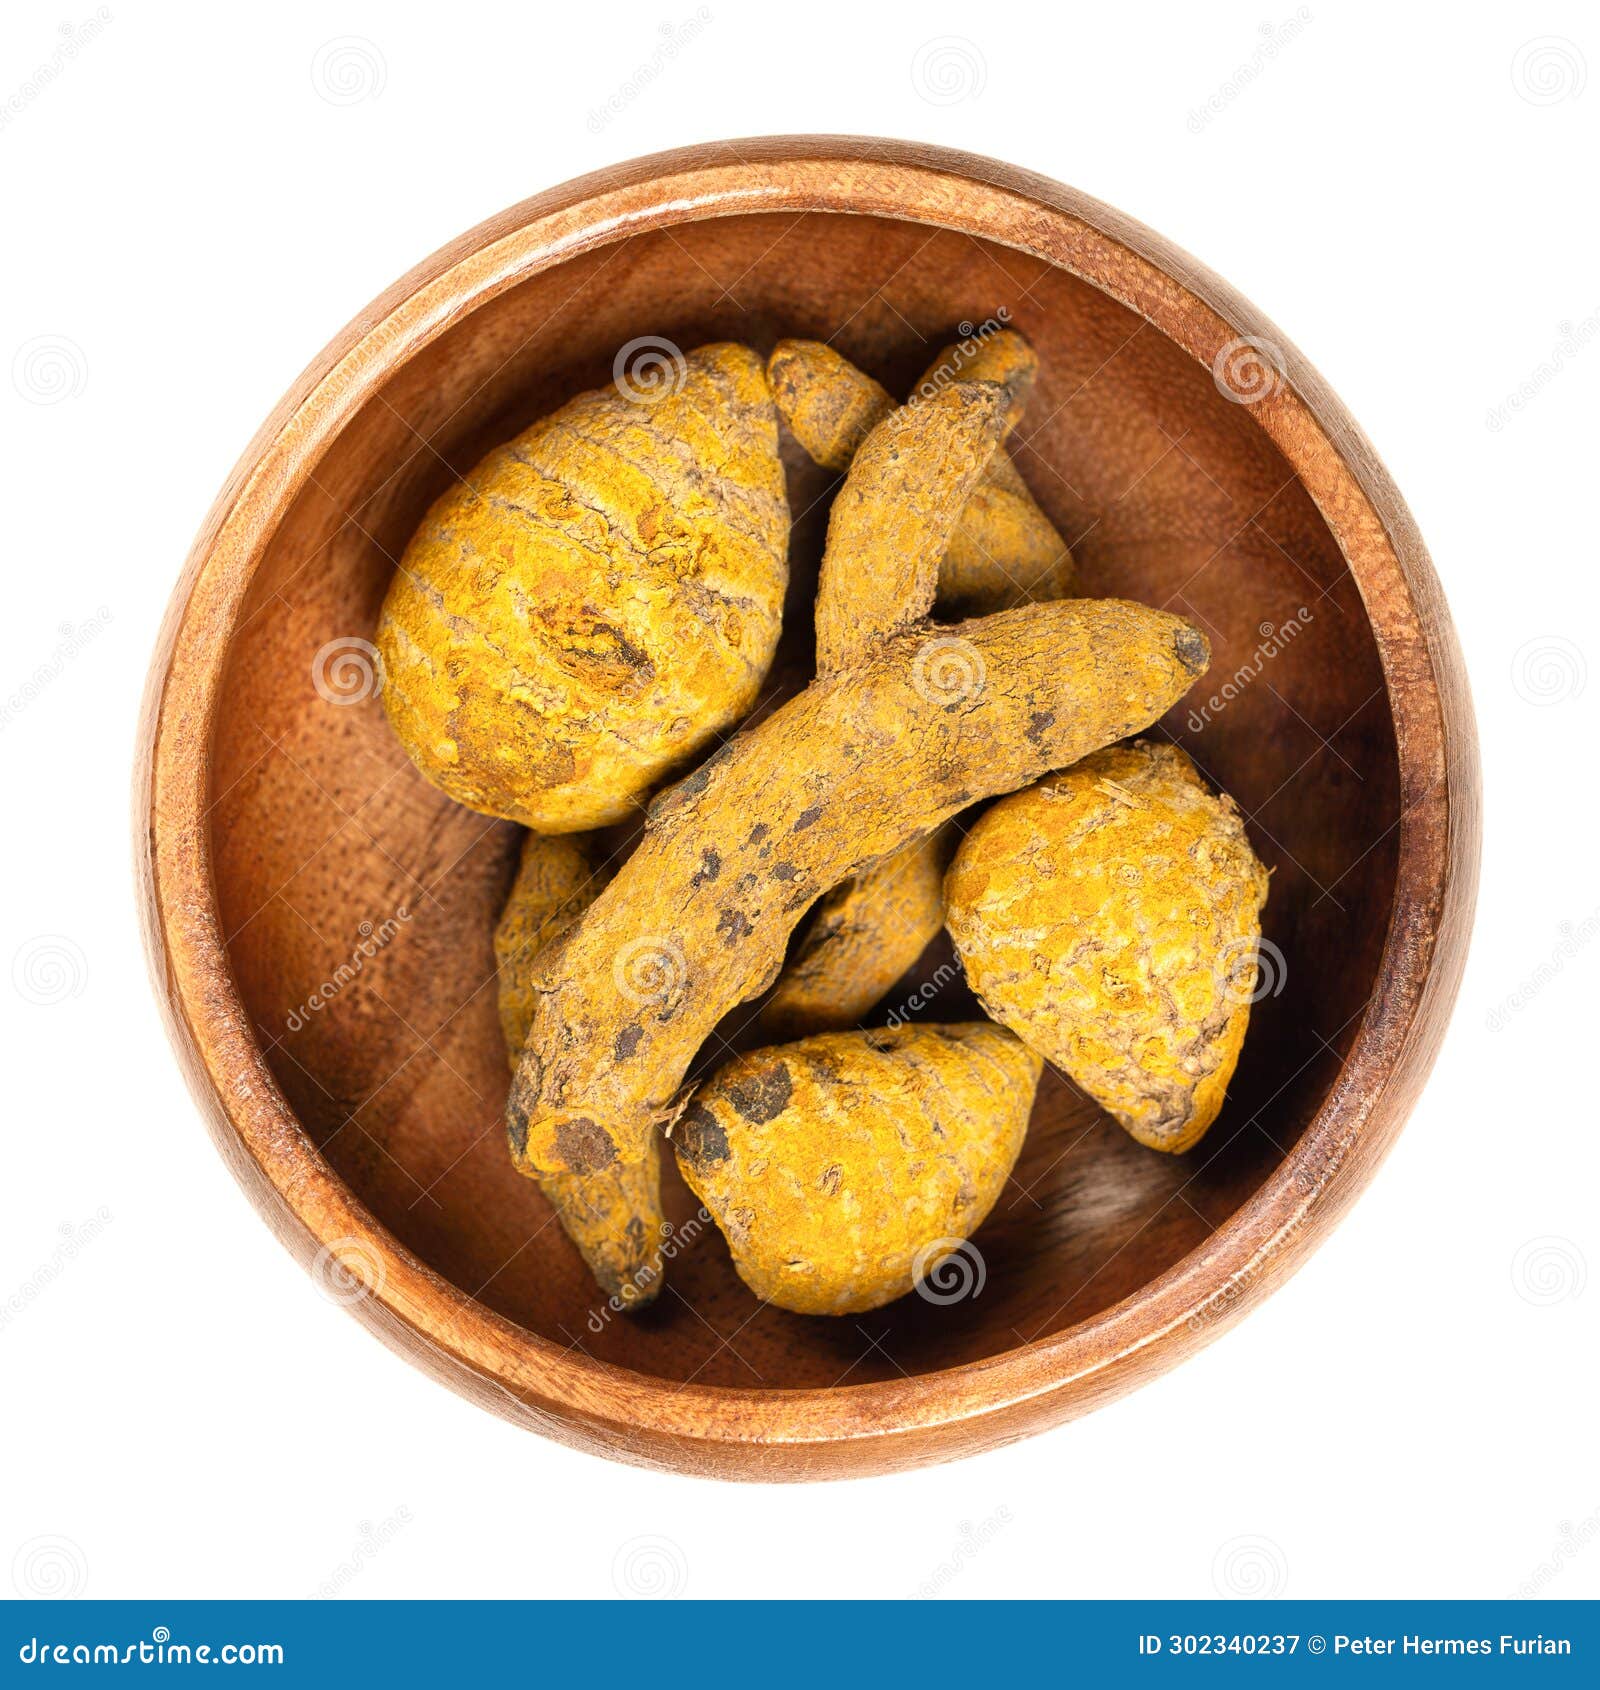 dried whole turmeric root, dehydrated rhizomes in a wooden bowl